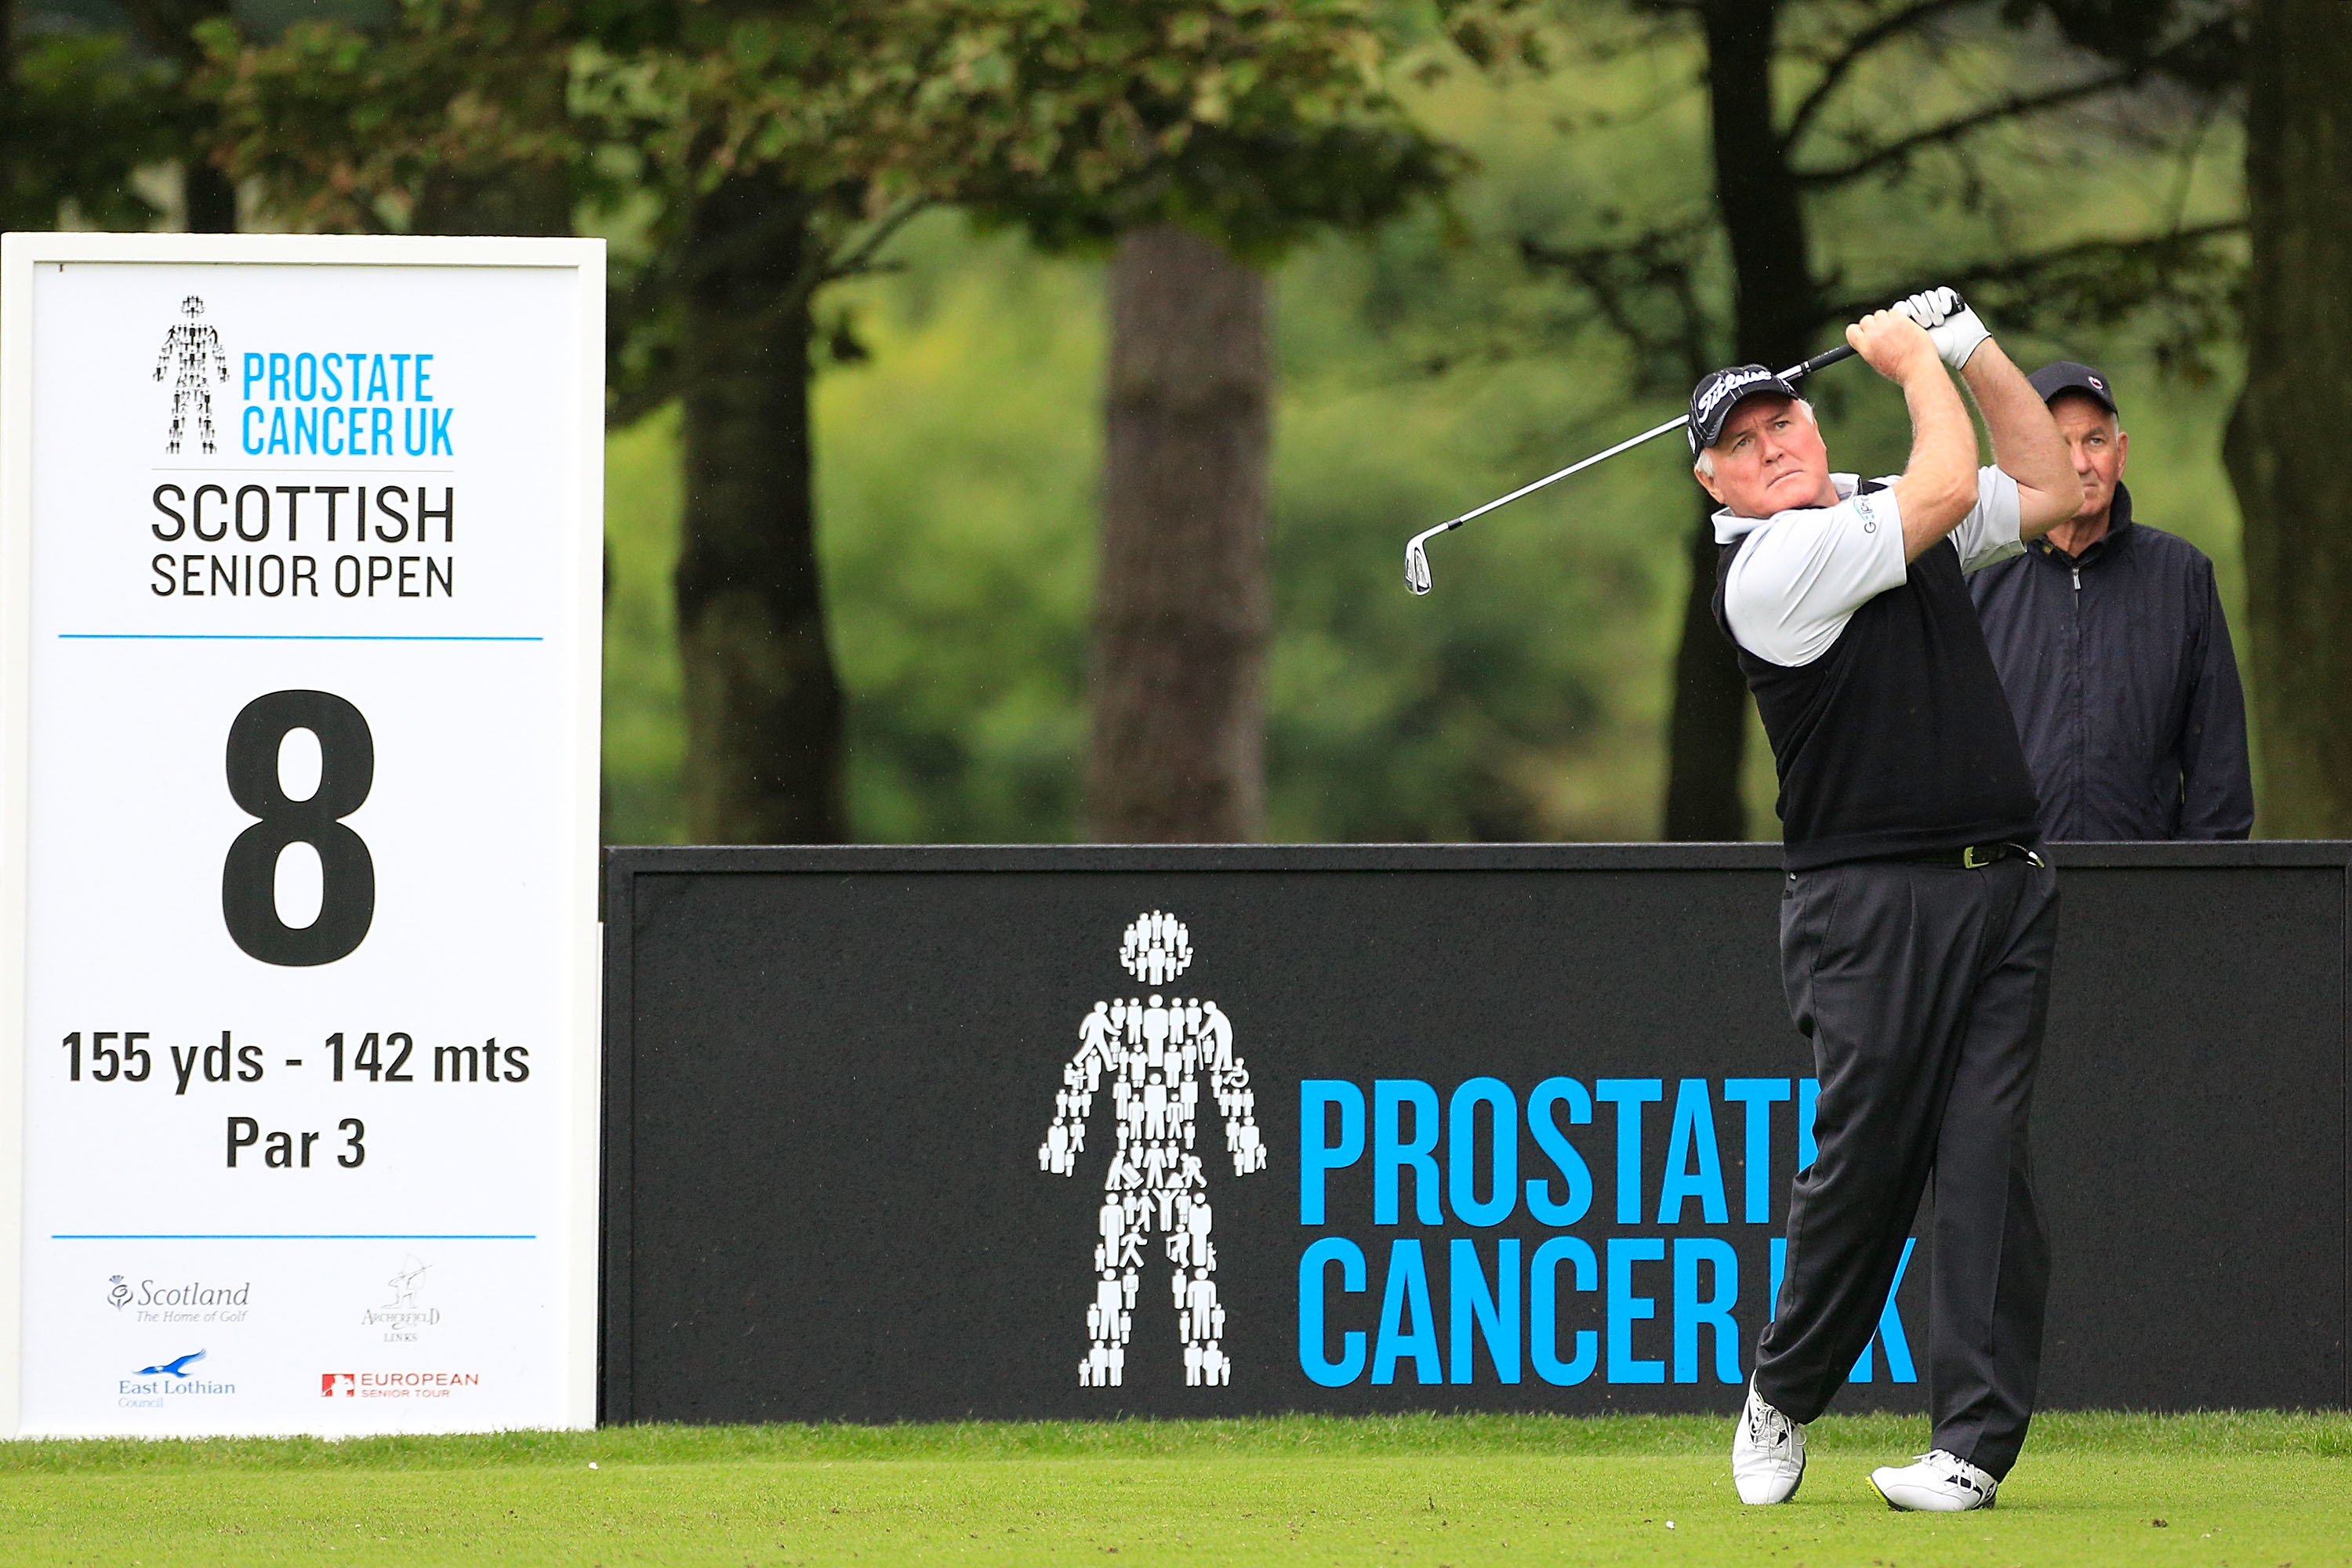 Prostate cancer advert on display as Ronan Rafferty shot 63 at Archerfield to lead the Scottish Seniors in 2016